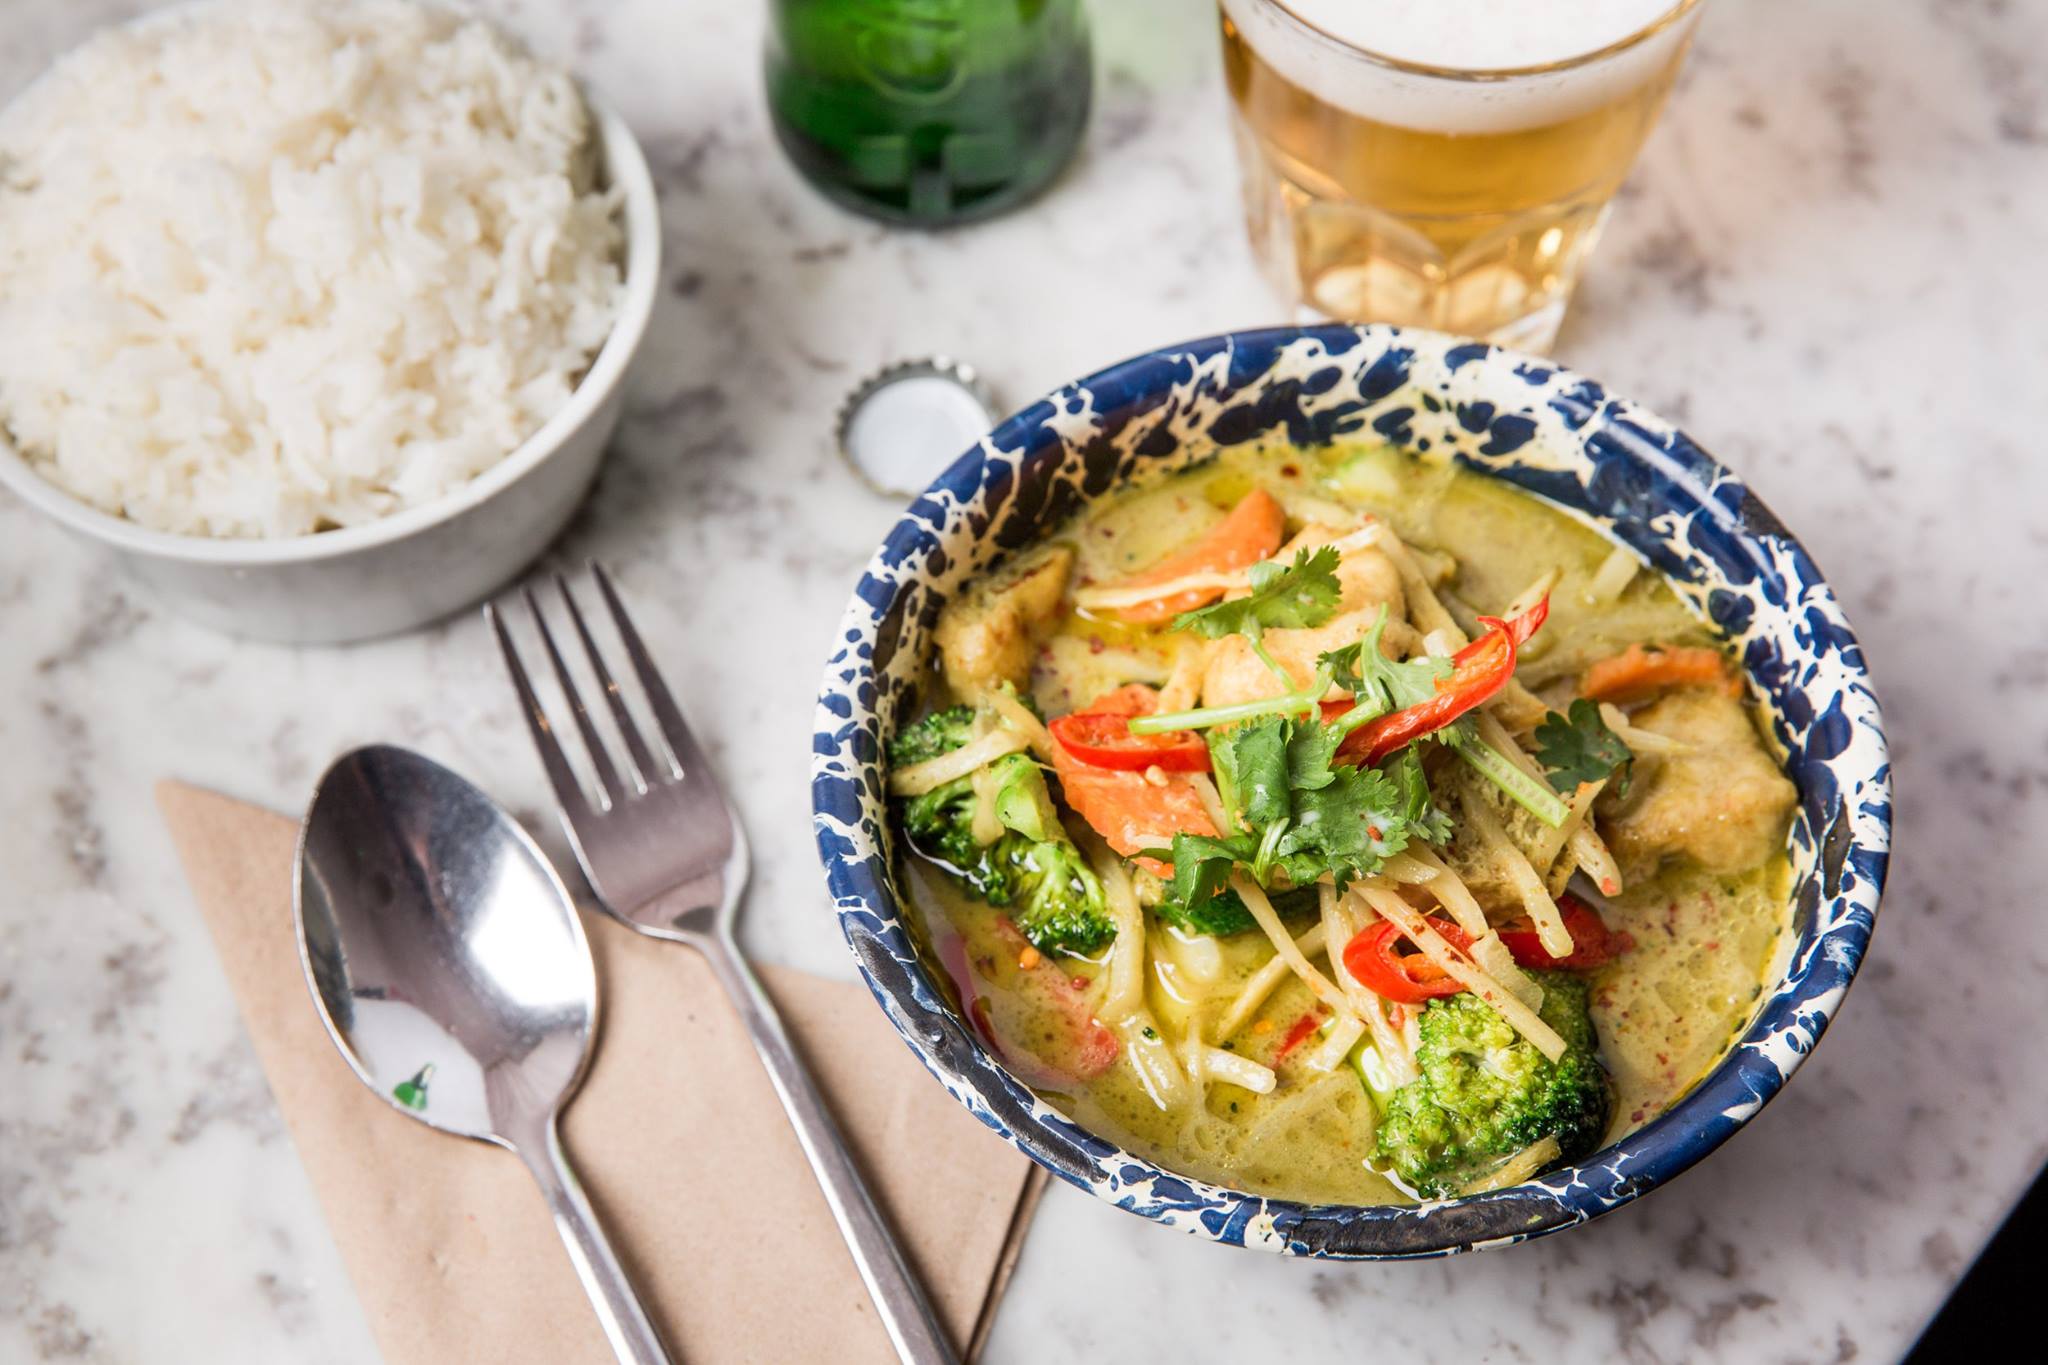 Rosa’s Thai will open a Thai restaurant in Liverpool, its first outside London